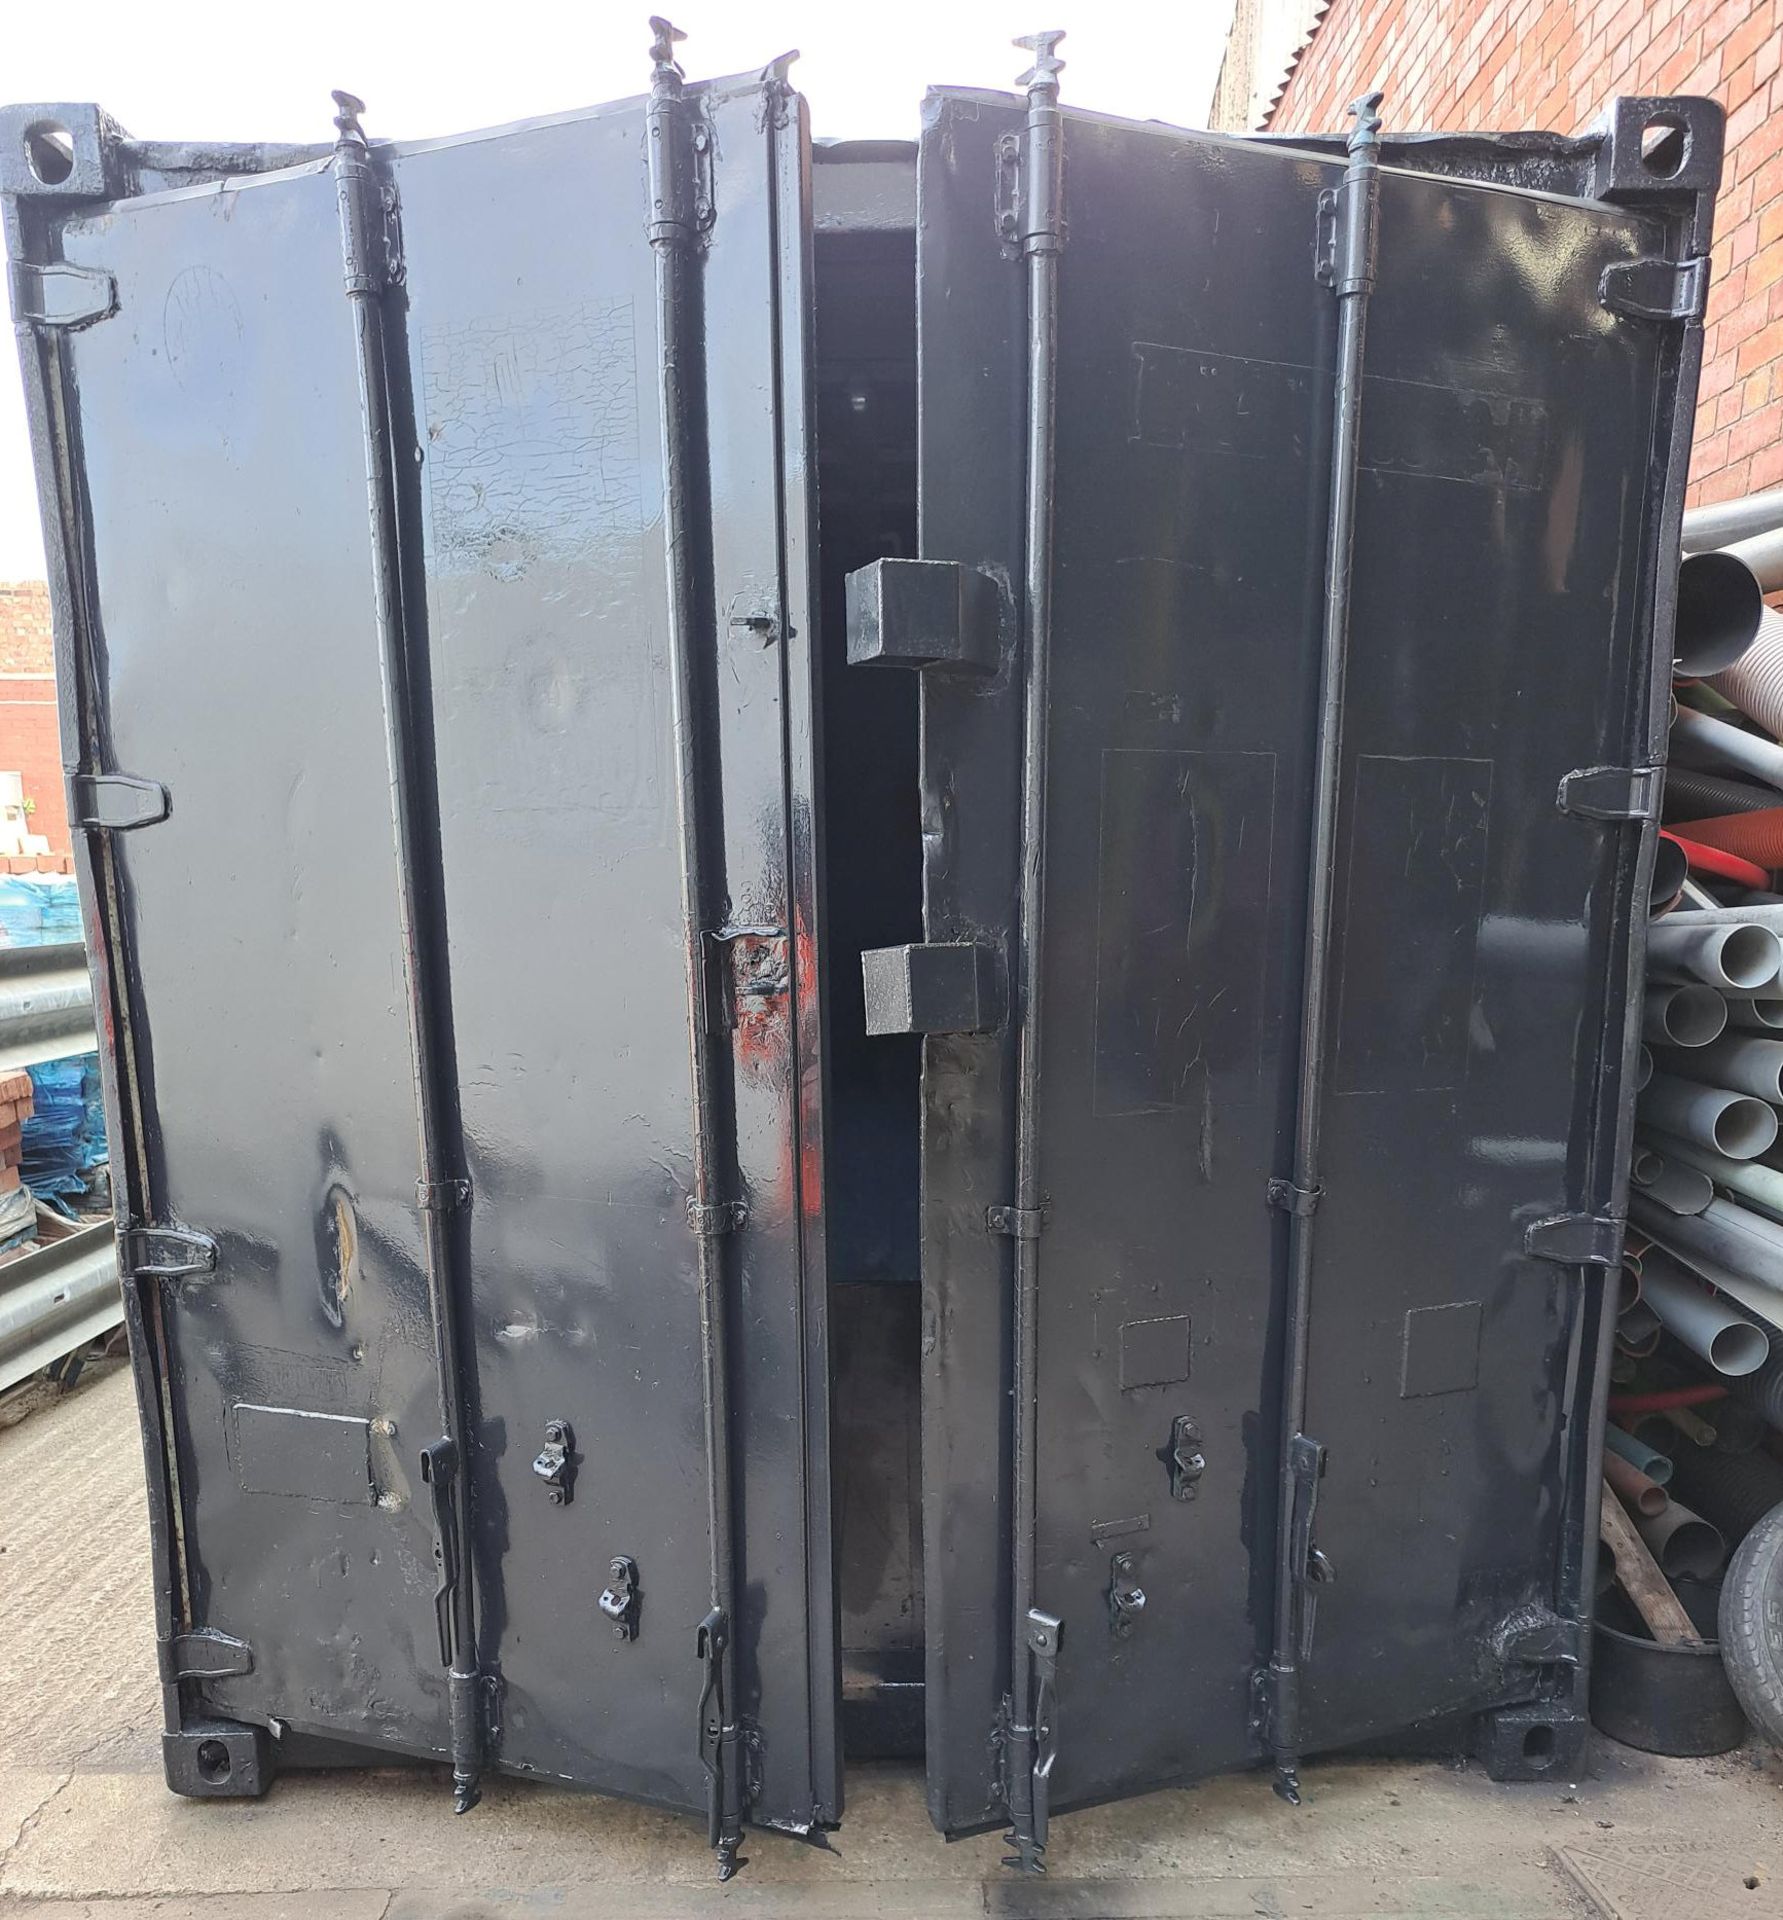 20'0" X 10'0" Lockable Steel Container - Ref: 76 - CL464 - Location: Liverpool L19 - Image 3 of 8